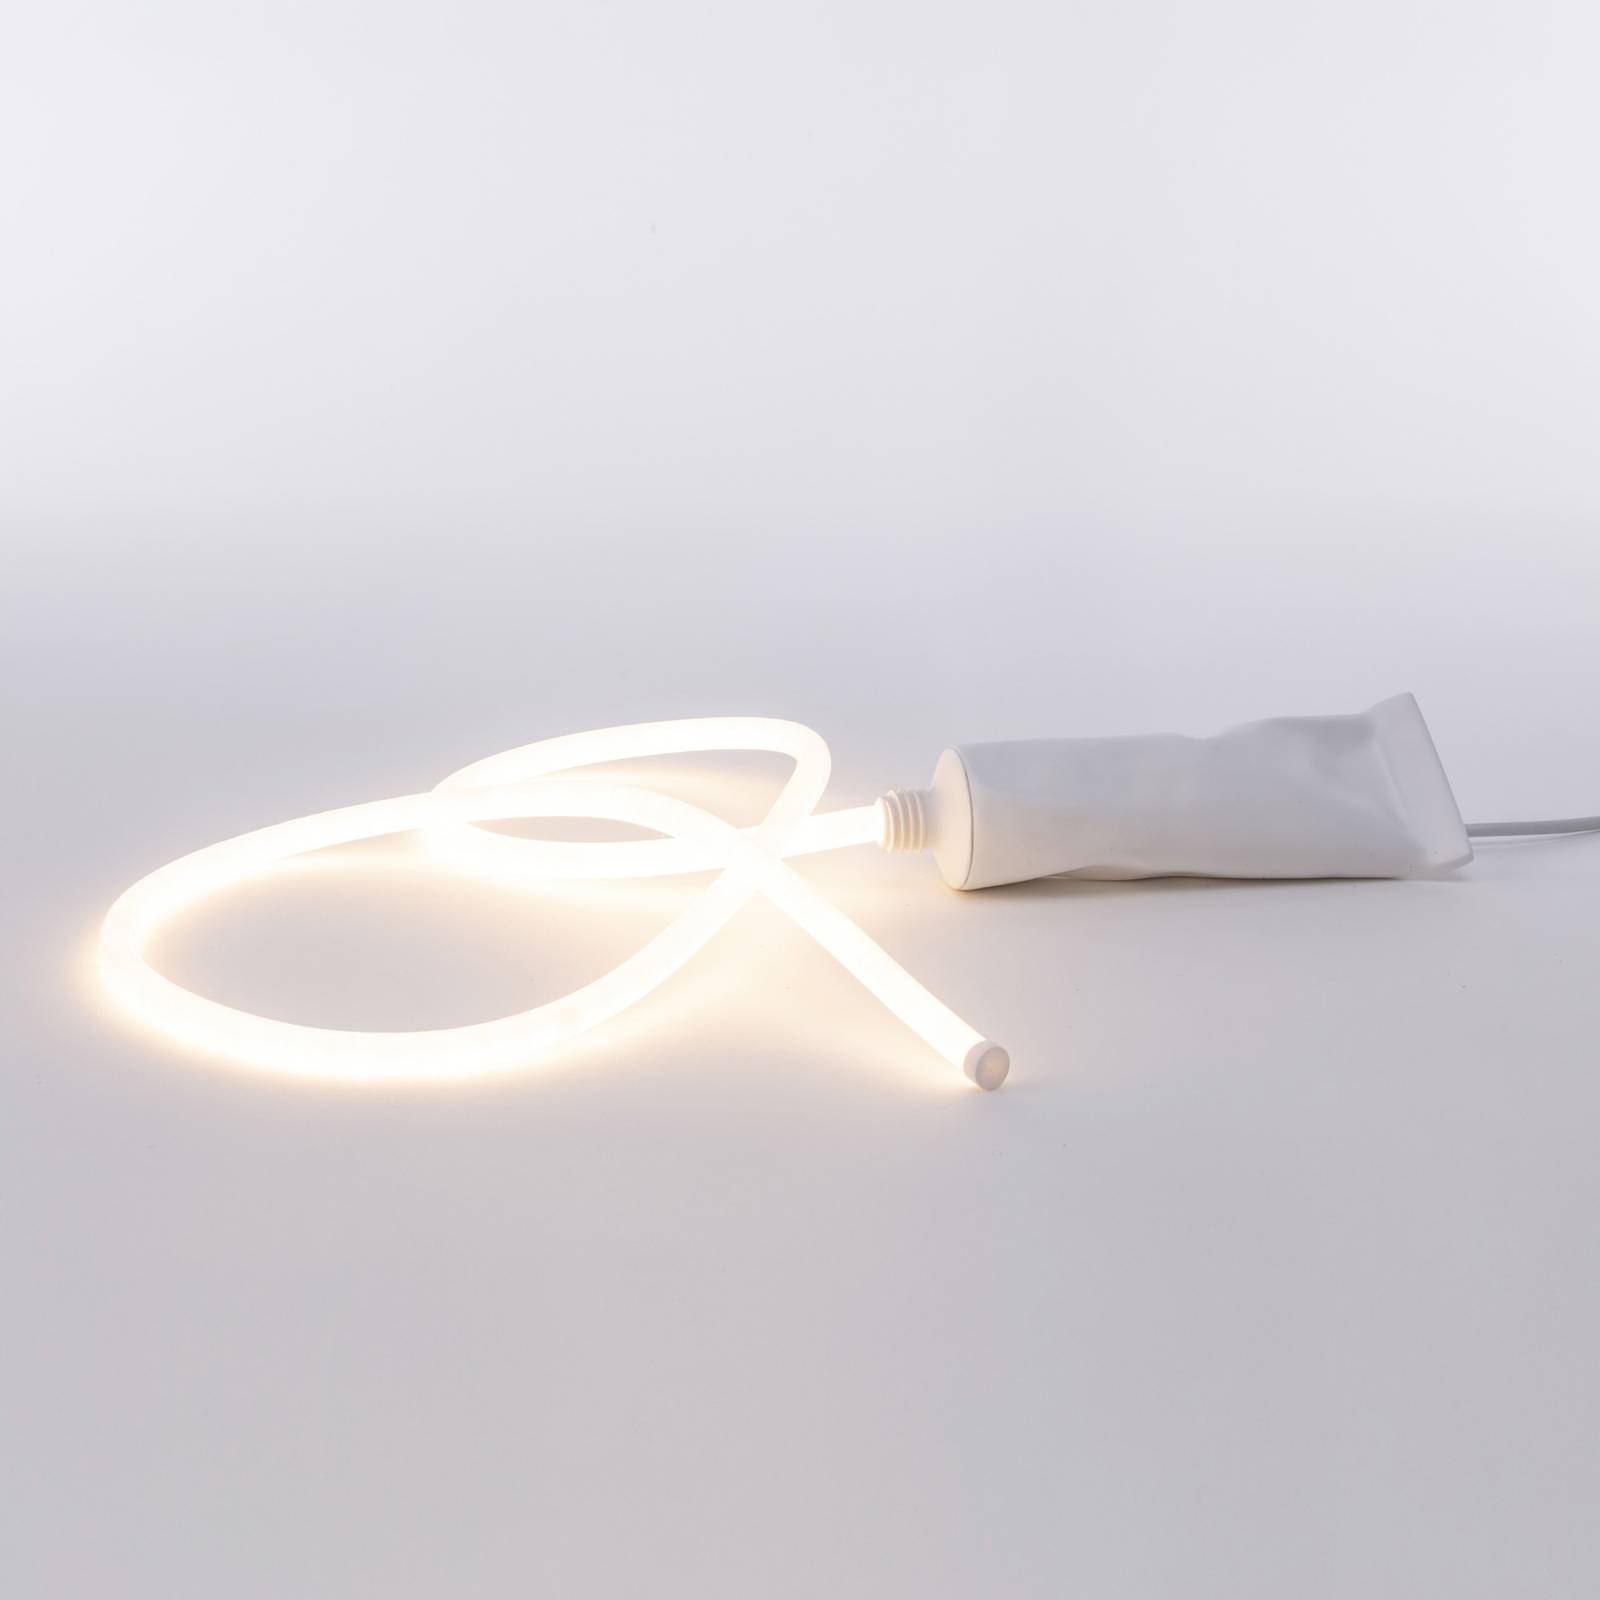 Image of SELETTI Lampe table déco LED Daily Glow tube de dentifrice 8008215153544